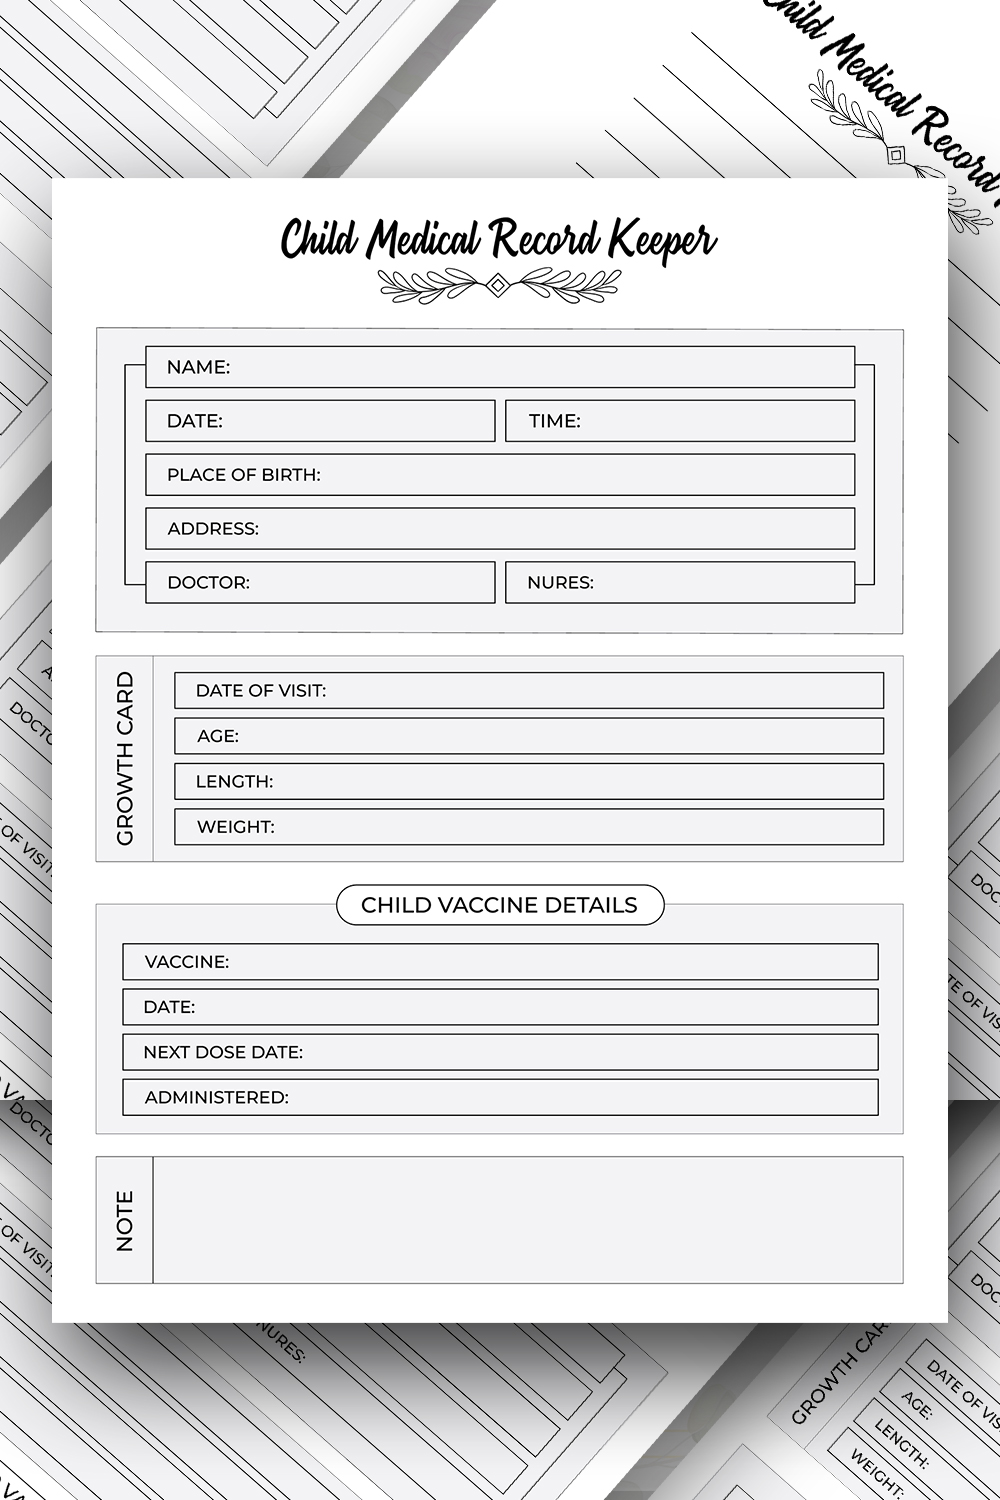 Child Medical Record Keeper Logbook – Low Content KDP Interior pinterest preview image.